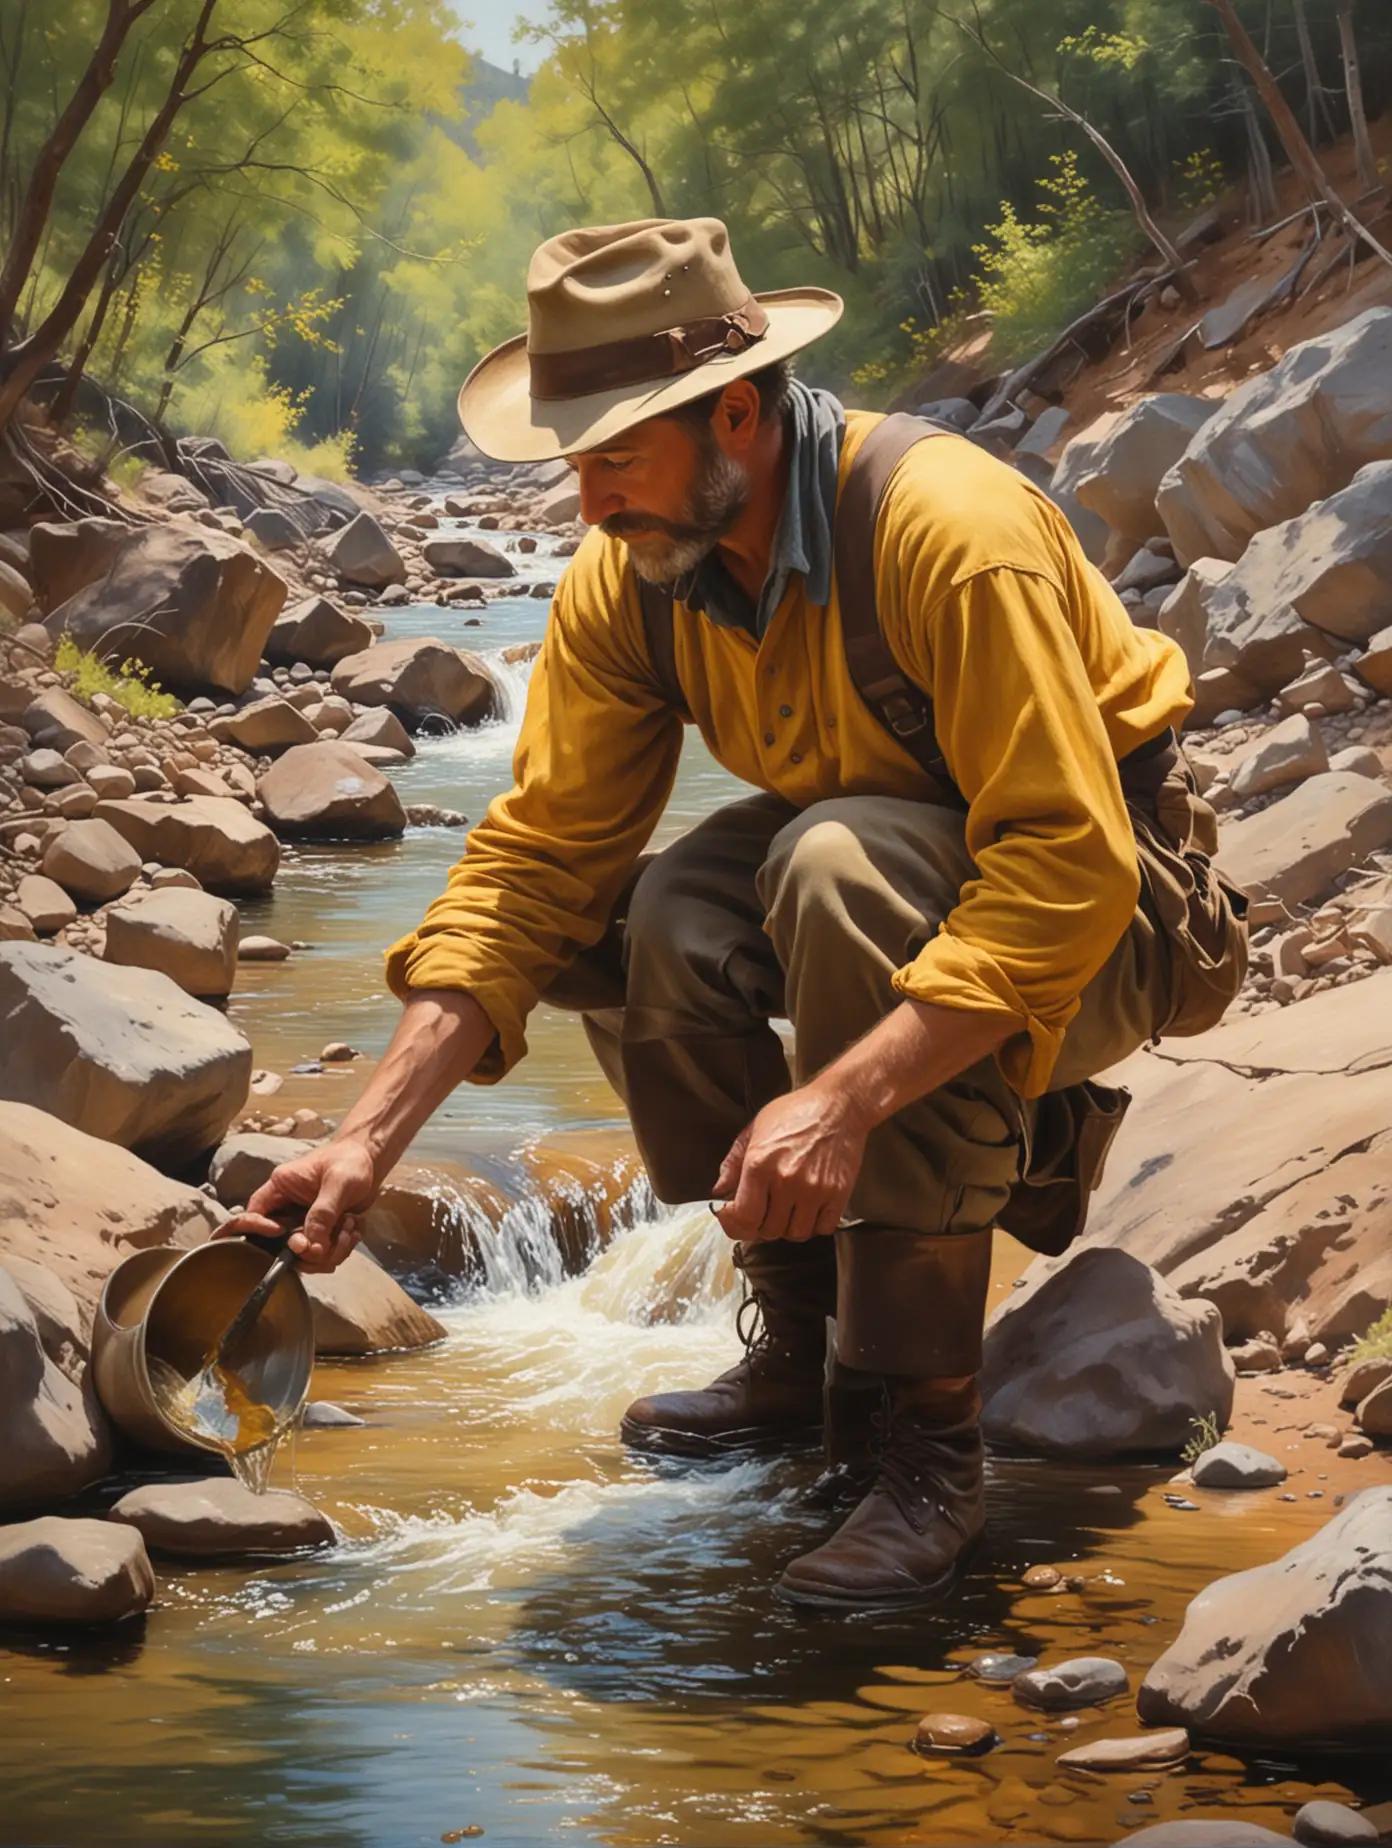 Degas-Style-Oil-Painting-Gold-Miner-Panning-for-Gold-in-Mountain-Creek